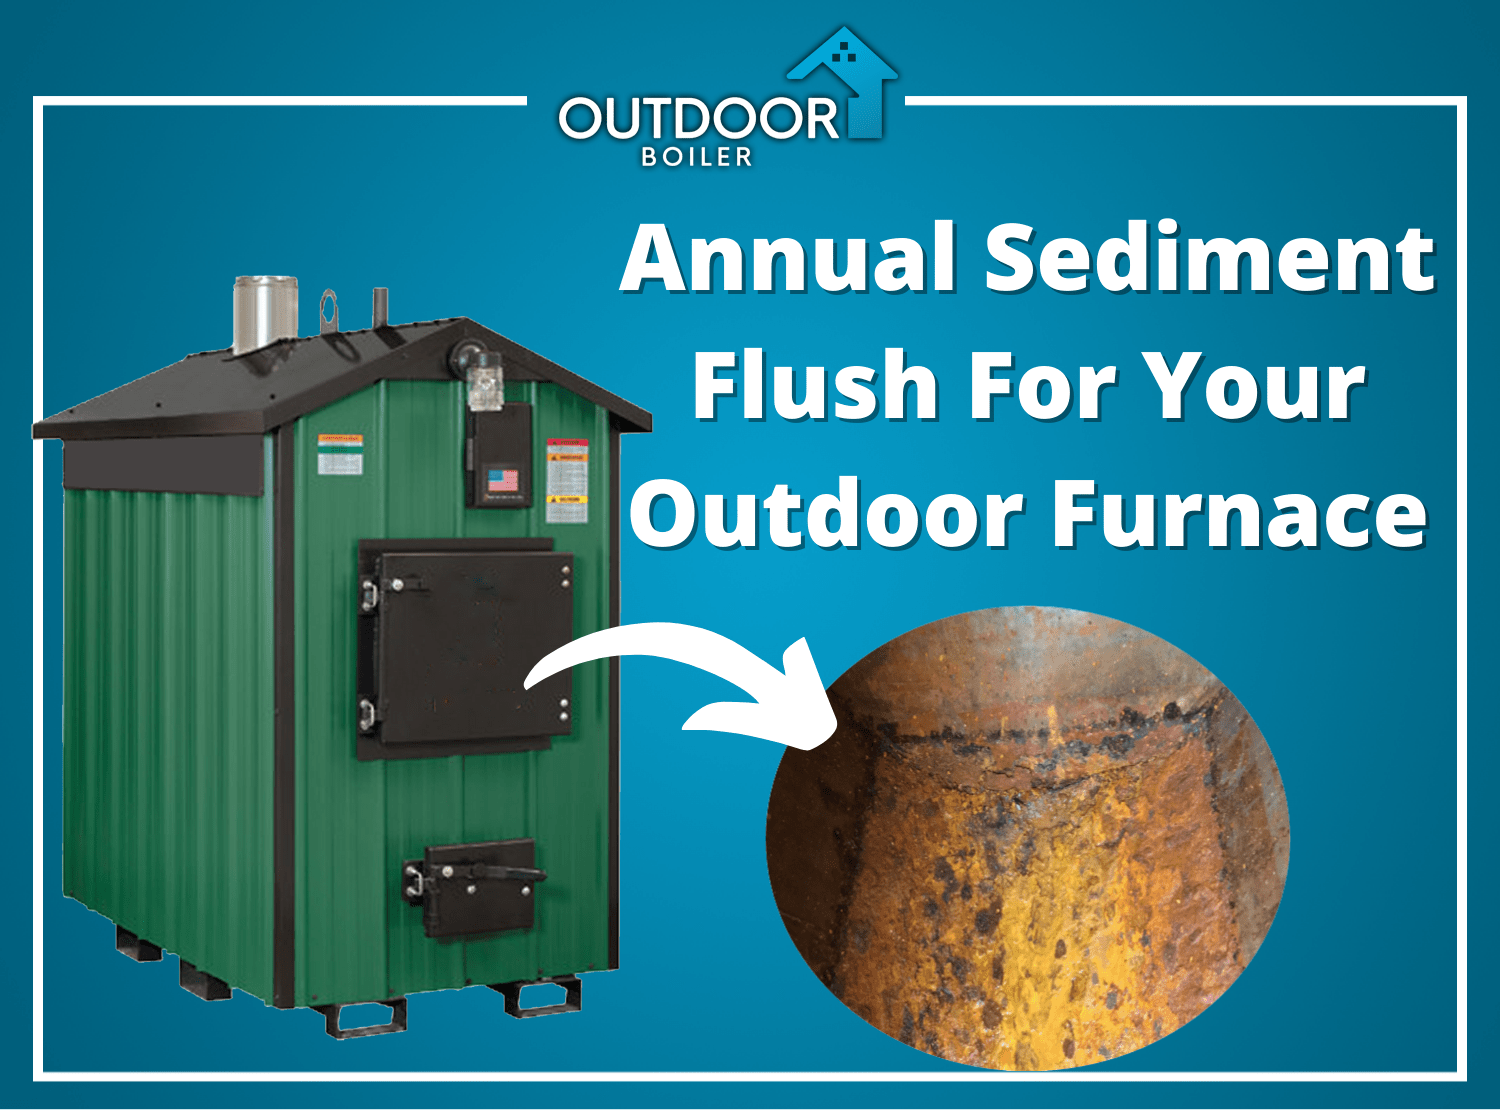 Annual Sediment Flush For Your Outdoor Wood Furnace –